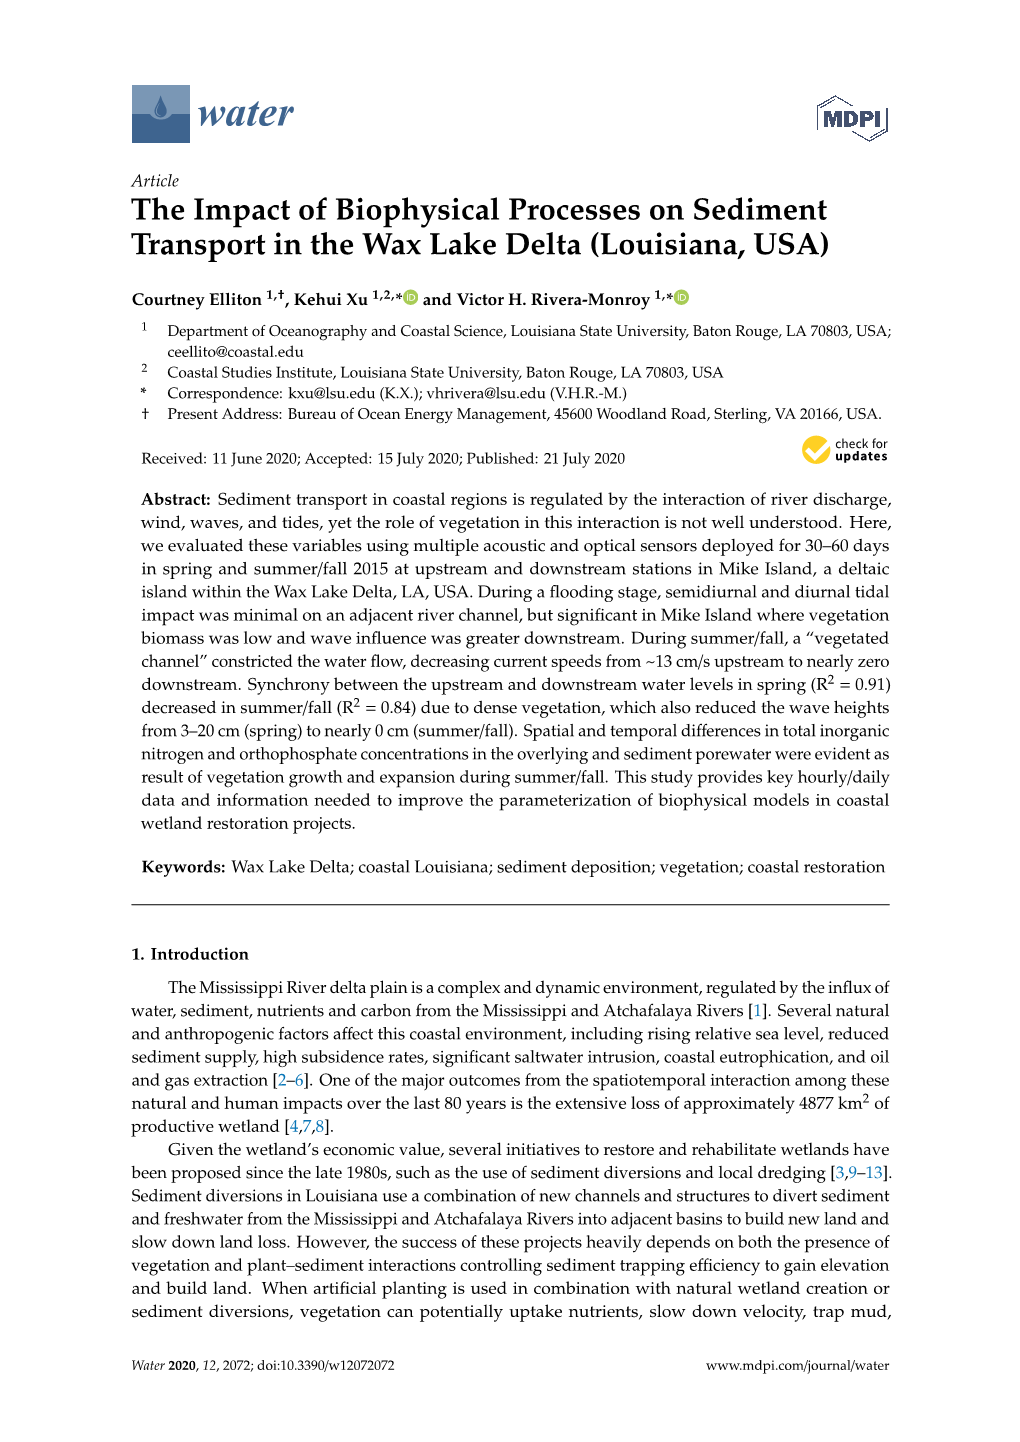 The Impact of Biophysical Processes on Sediment Transport in the Wax Lake Delta (Louisiana, USA)